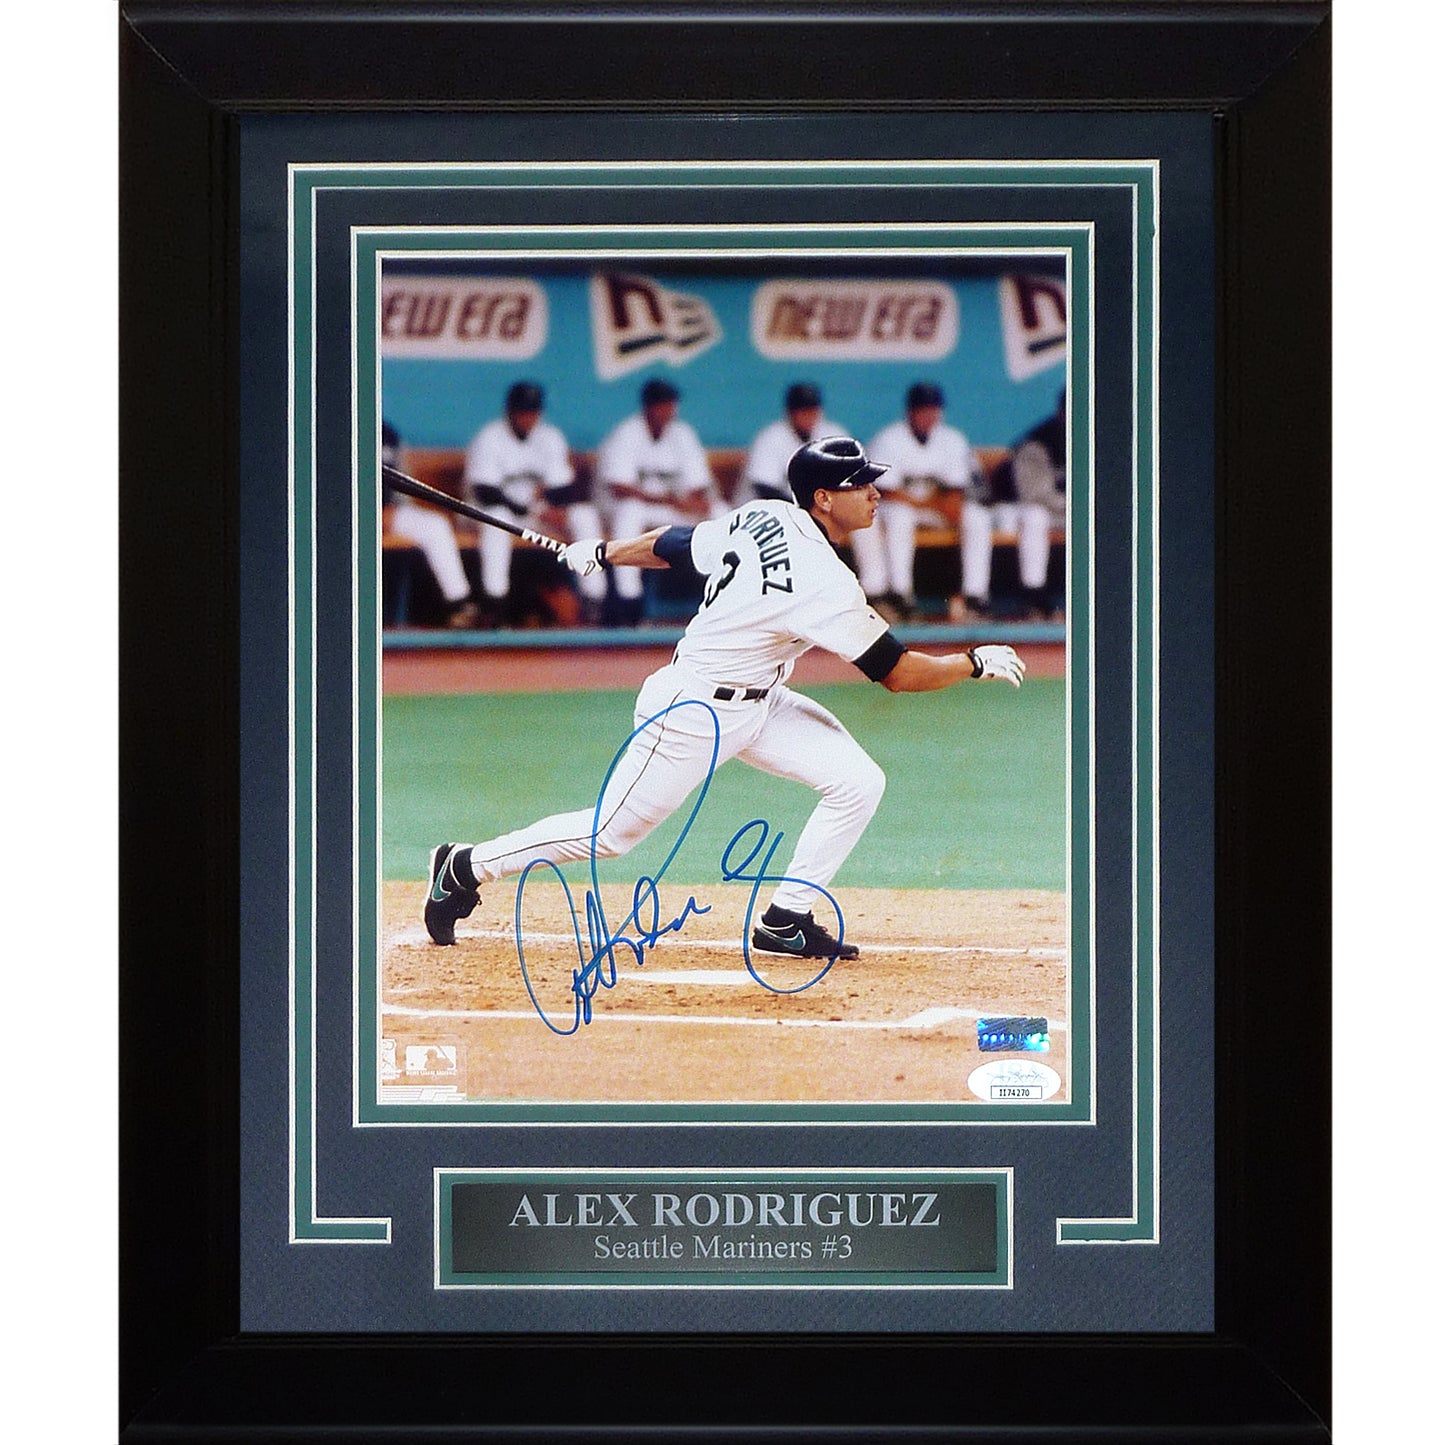 Alex Rodriguez Autographed Seattle Mariners Deluxe Framed 8x10 Photo